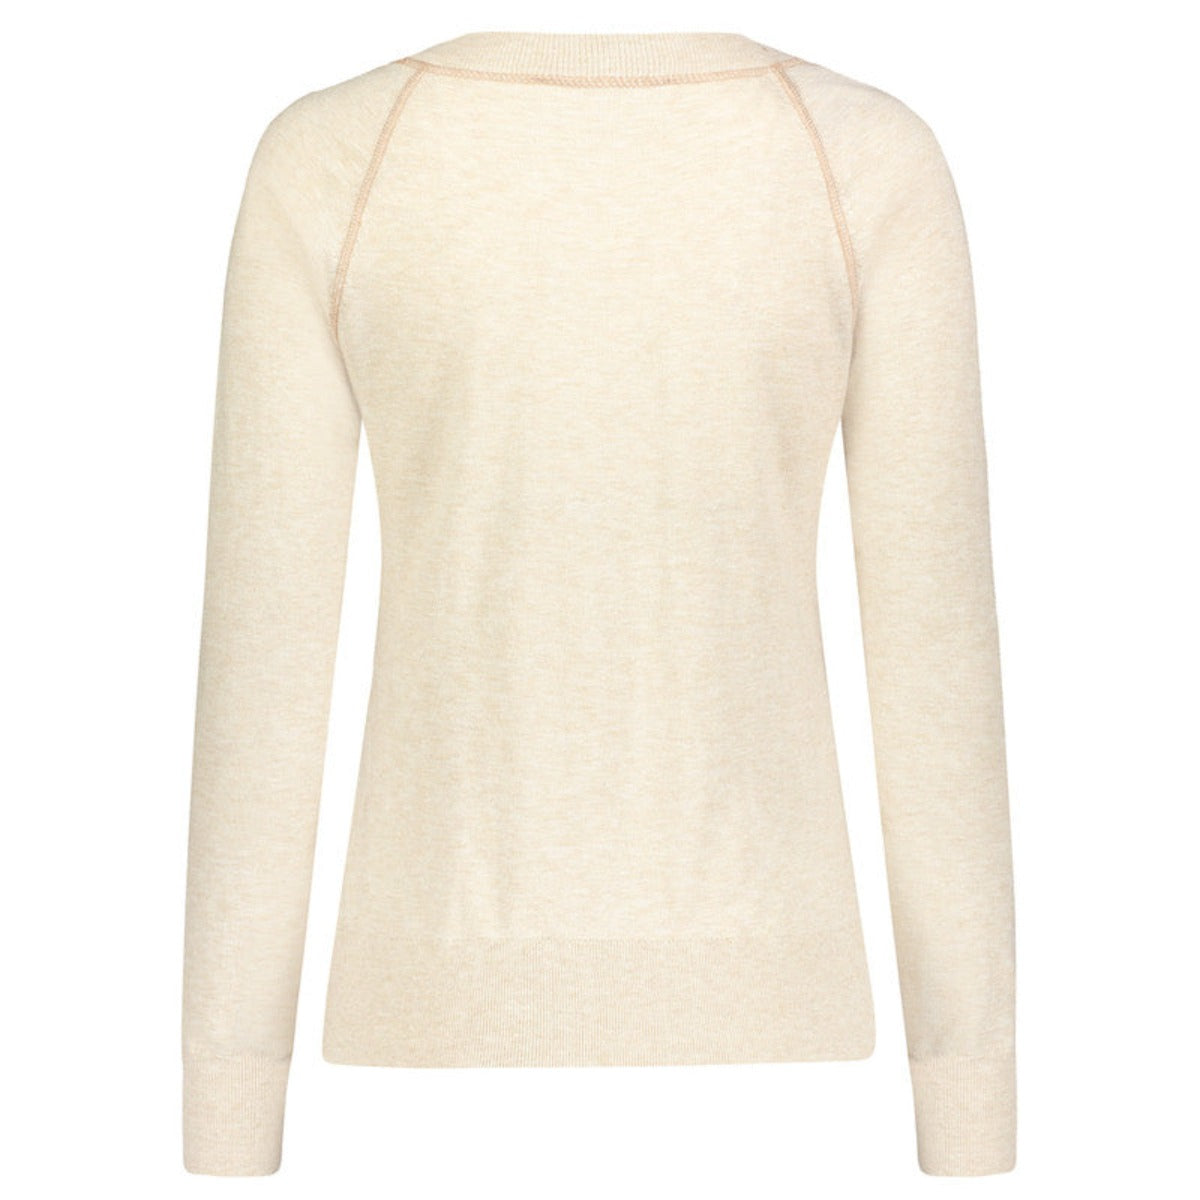 Static image of the sweater from the back. The actual color is a warm toasty beige. This photo highlights the contrast stitching detail from the back.